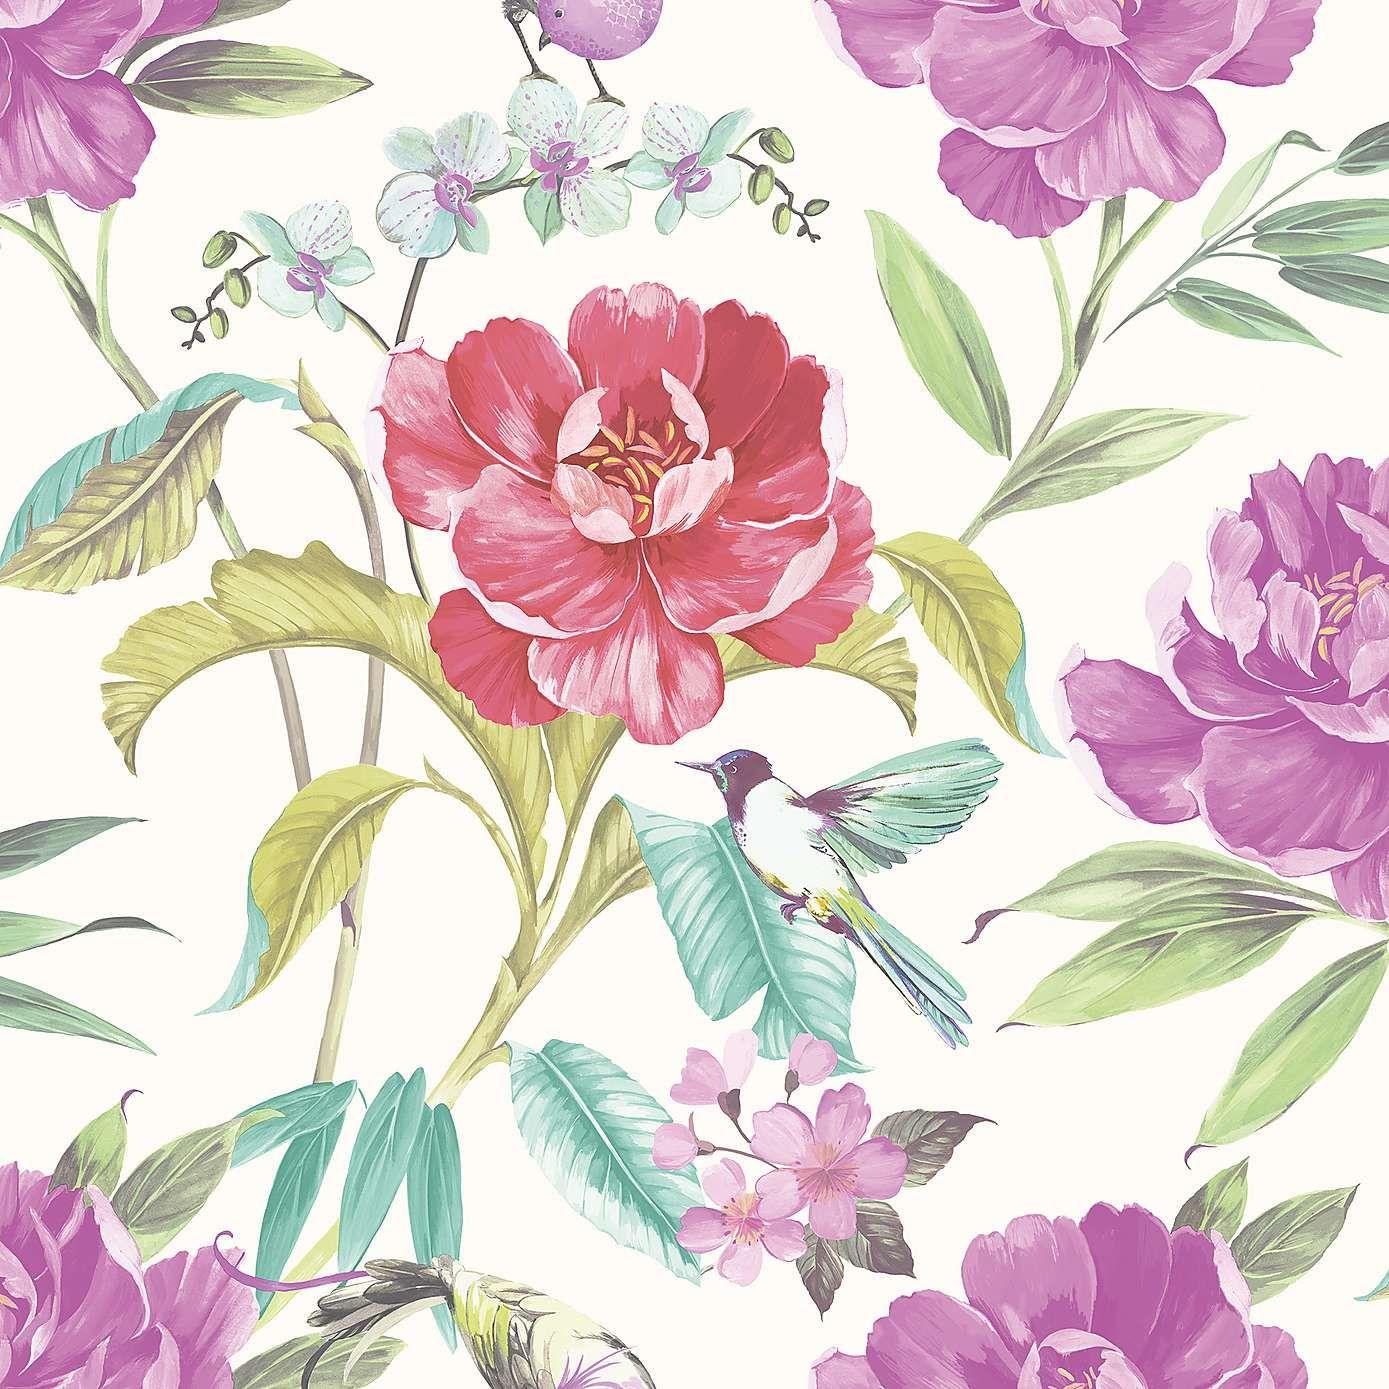 Bursting with vibrant pinks and purples, our opulent floral